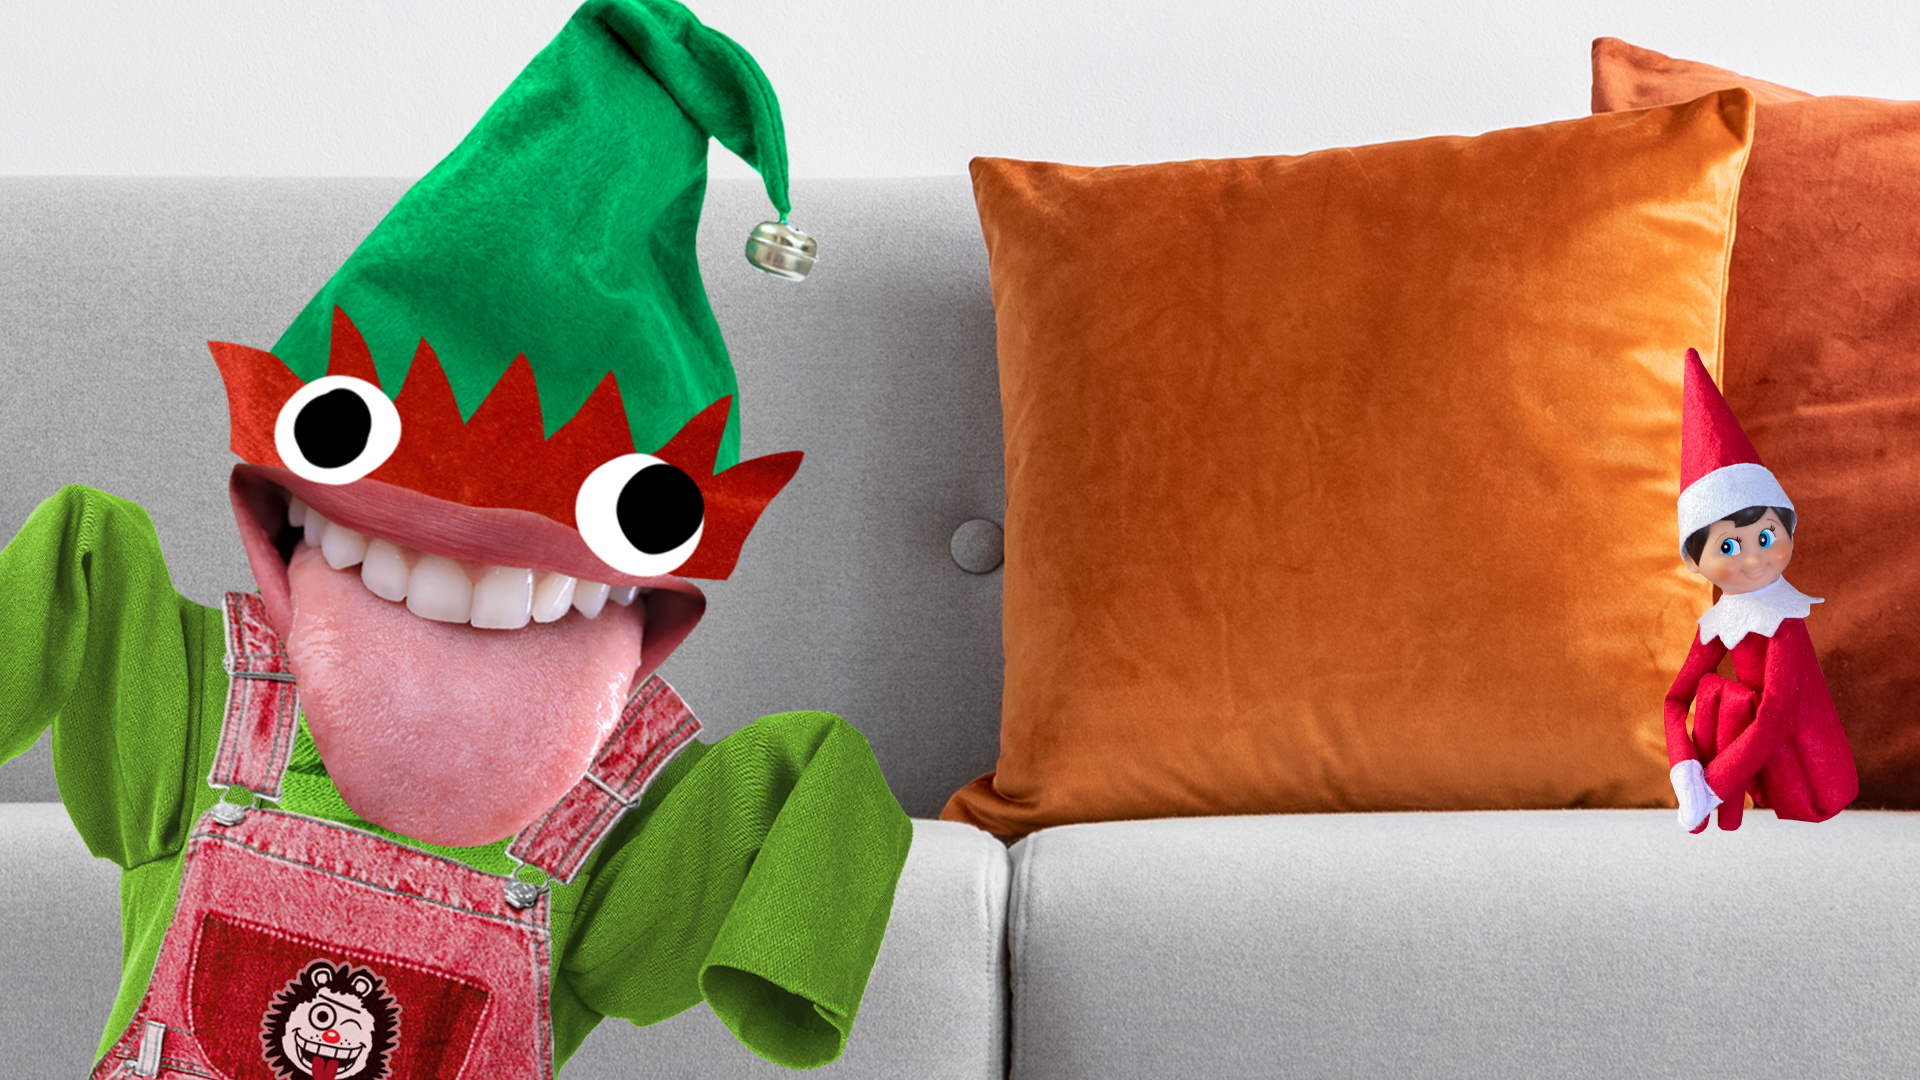 Two elves on a sofa